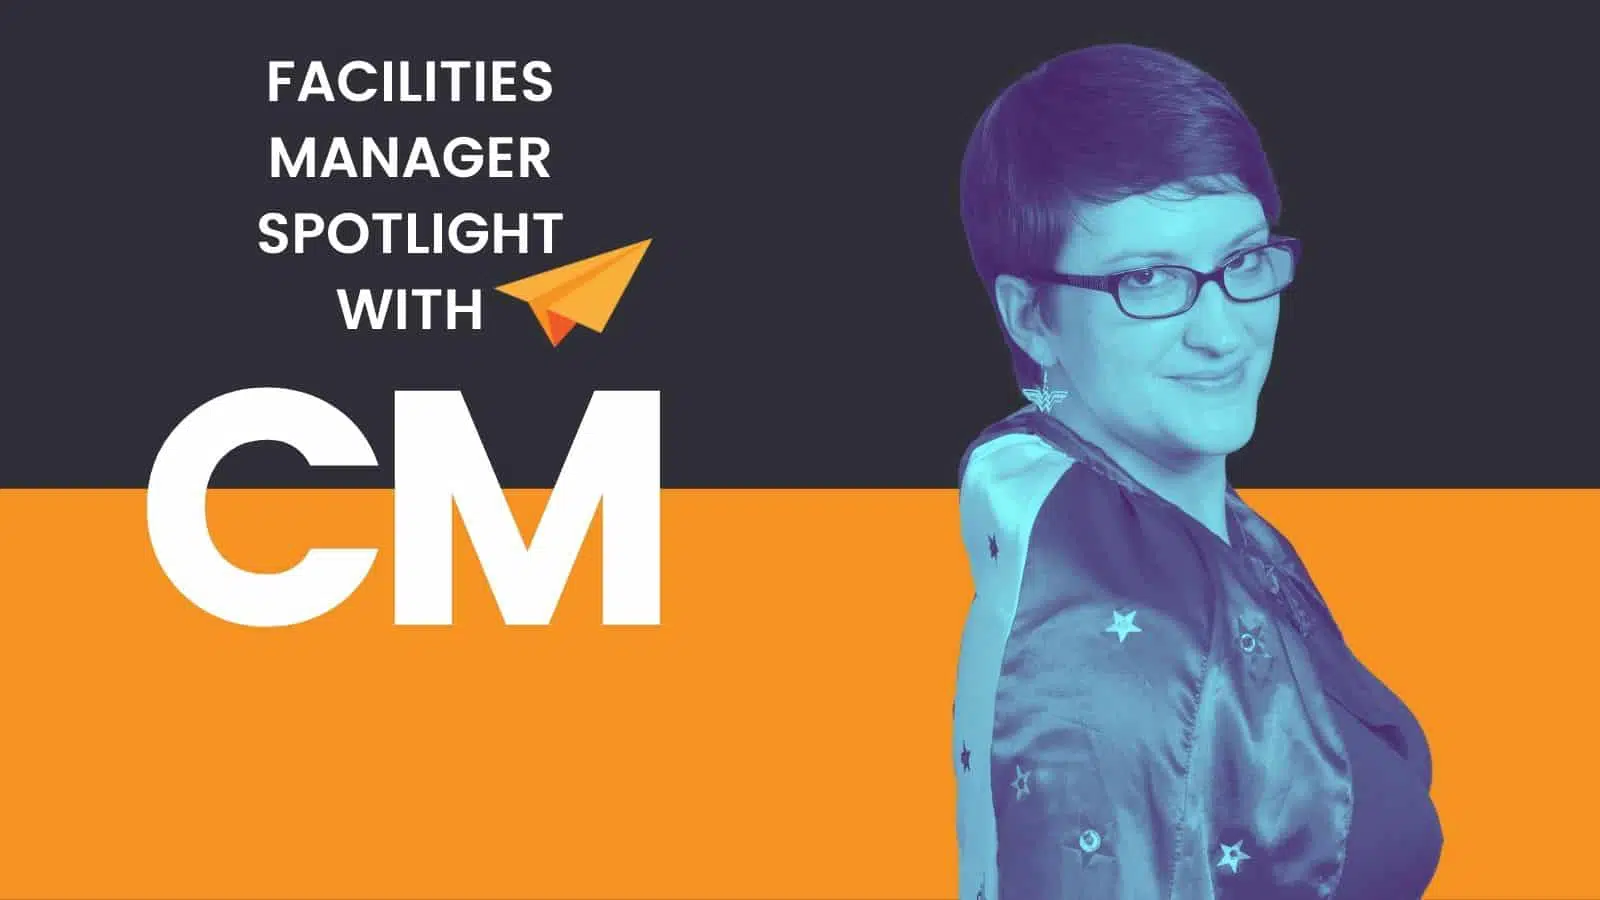 Facilities Manager Spotlight: Interview with Carolyn McGary